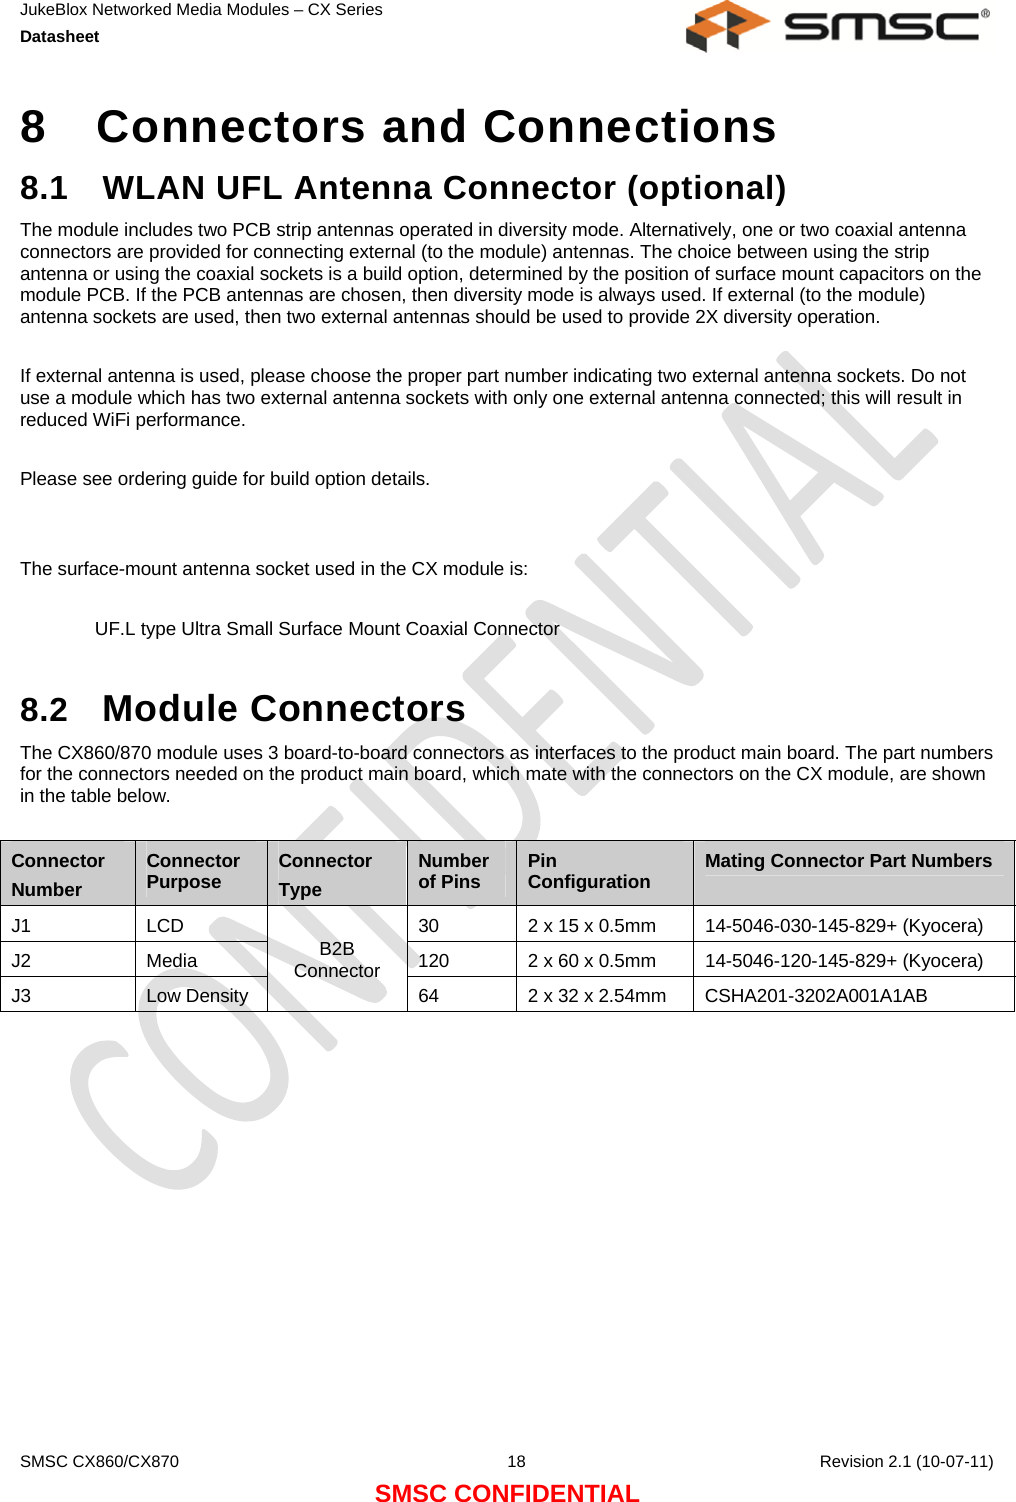 JukeBlox Networked Media Modules – CX Series  Datasheet    SMSC CX860/CX870  18    Revision 2.1 (10-07-11) SMSC CONFIDENTIAL 8  Connectors and Connections 8.1  WLAN UFL Antenna Connector (optional) The module includes two PCB strip antennas operated in diversity mode. Alternatively, one or two coaxial antenna connectors are provided for connecting external (to the module) antennas. The choice between using the strip antenna or using the coaxial sockets is a build option, determined by the position of surface mount capacitors on the module PCB. If the PCB antennas are chosen, then diversity mode is always used. If external (to the module) antenna sockets are used, then two external antennas should be used to provide 2X diversity operation.  If external antenna is used, please choose the proper part number indicating two external antenna sockets. Do not use a module which has two external antenna sockets with only one external antenna connected; this will result in reduced WiFi performance.  Please see ordering guide for build option details.   The surface-mount antenna socket used in the CX module is:  UF.L type Ultra Small Surface Mount Coaxial Connector  8.2  Module Connectors The CX860/870 module uses 3 board-to-board connectors as interfaces to the product main board. The part numbers for the connectors needed on the product main board, which mate with the connectors on the CX module, are shown in the table below.  Connector Number Connector Purpose  Connector Type Number of Pins  Pin Configuration  Mating Connector Part Numbers J1  LCD  30  2 x 15 x 0.5mm  14-5046-030-145-829+ (Kyocera) J2  Media  120  2 x 60 x 0.5mm  14-5046-120-145-829+ (Kyocera) J3 Low Density B2B Connector 64  2 x 32 x 2.54mm  CSHA201-3202A001A1AB  